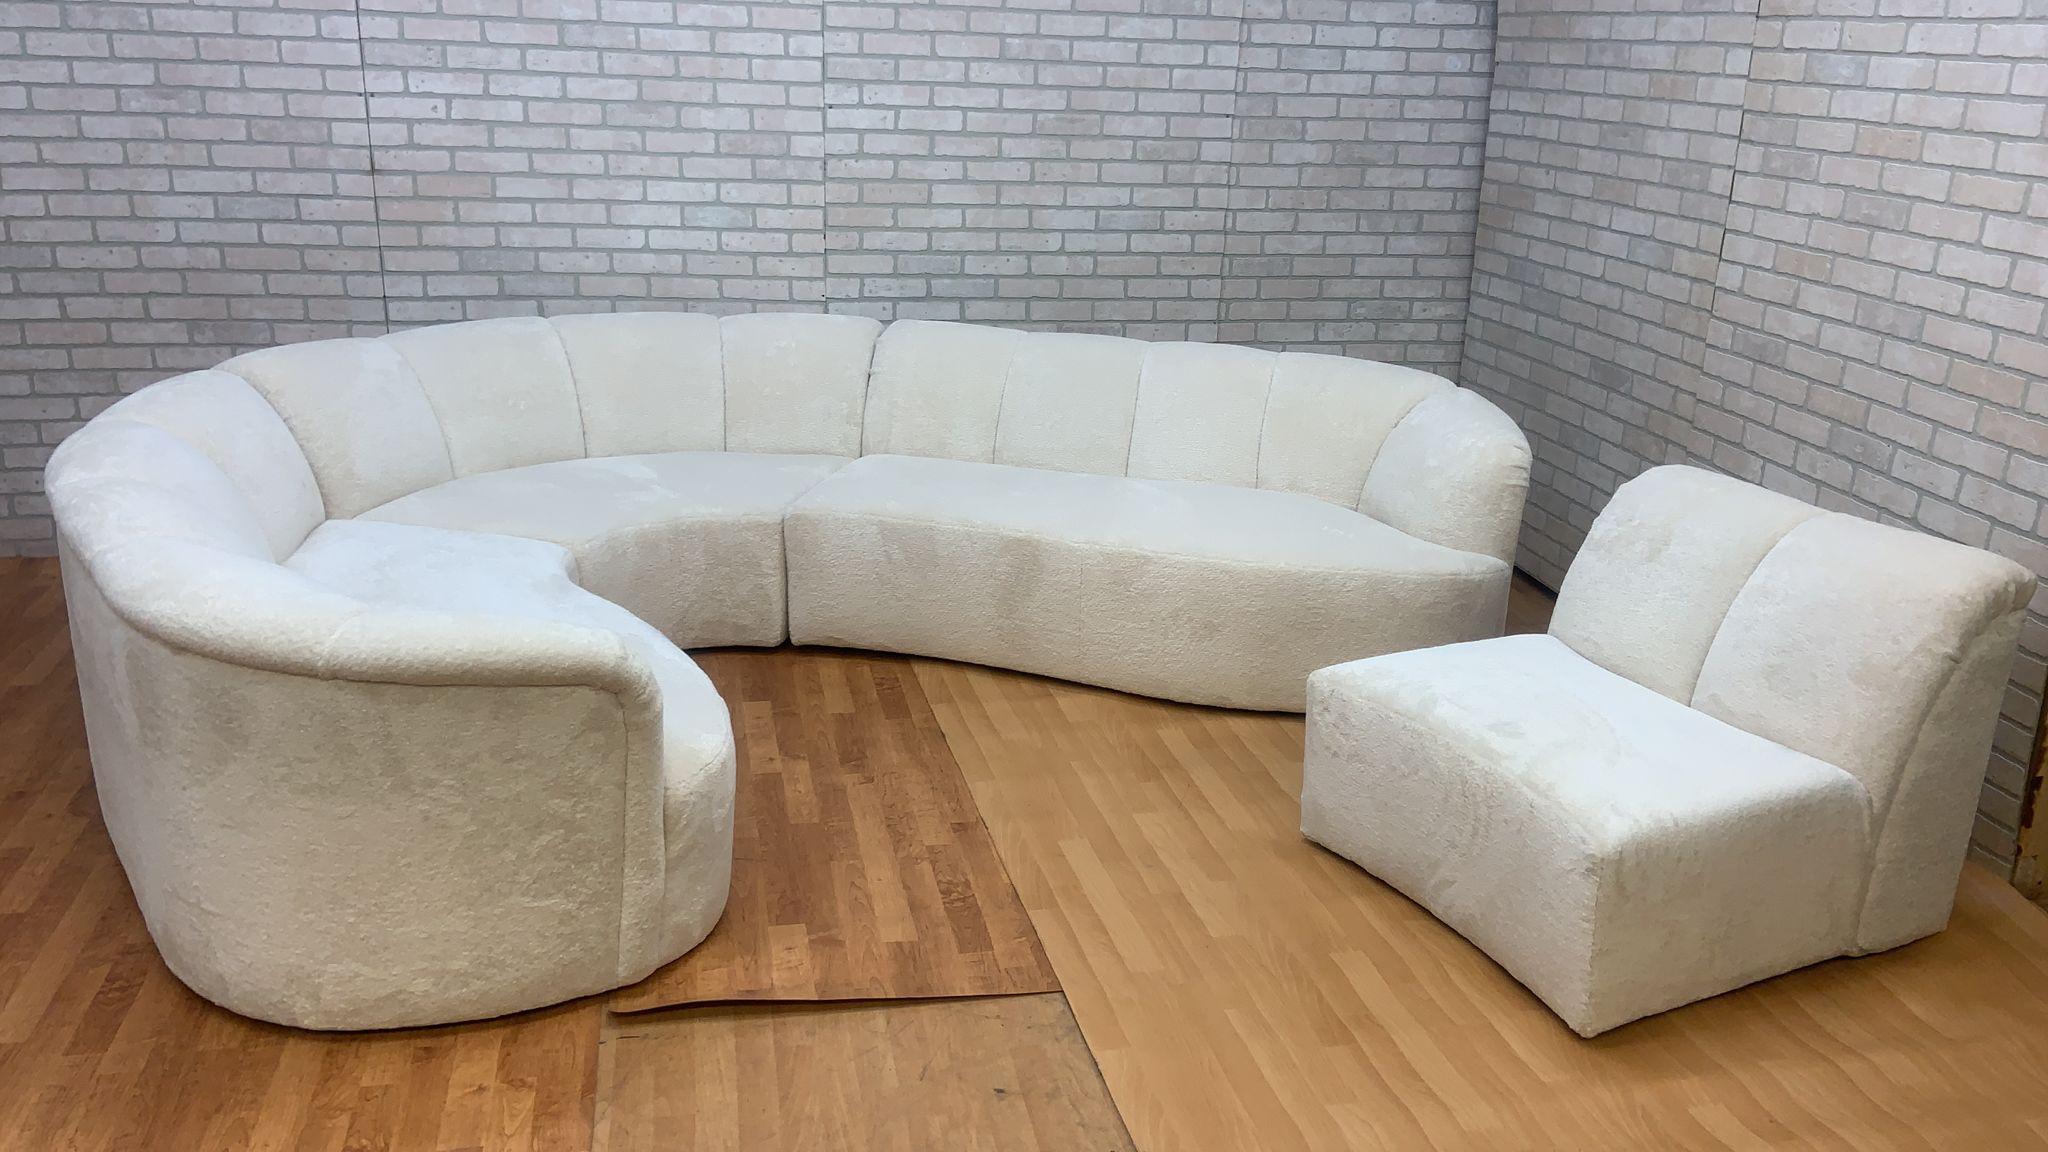 Hand-Crafted Curved Channel Back Serpentine Sectional Sofa Newly Upholstered in Alpaca Wool